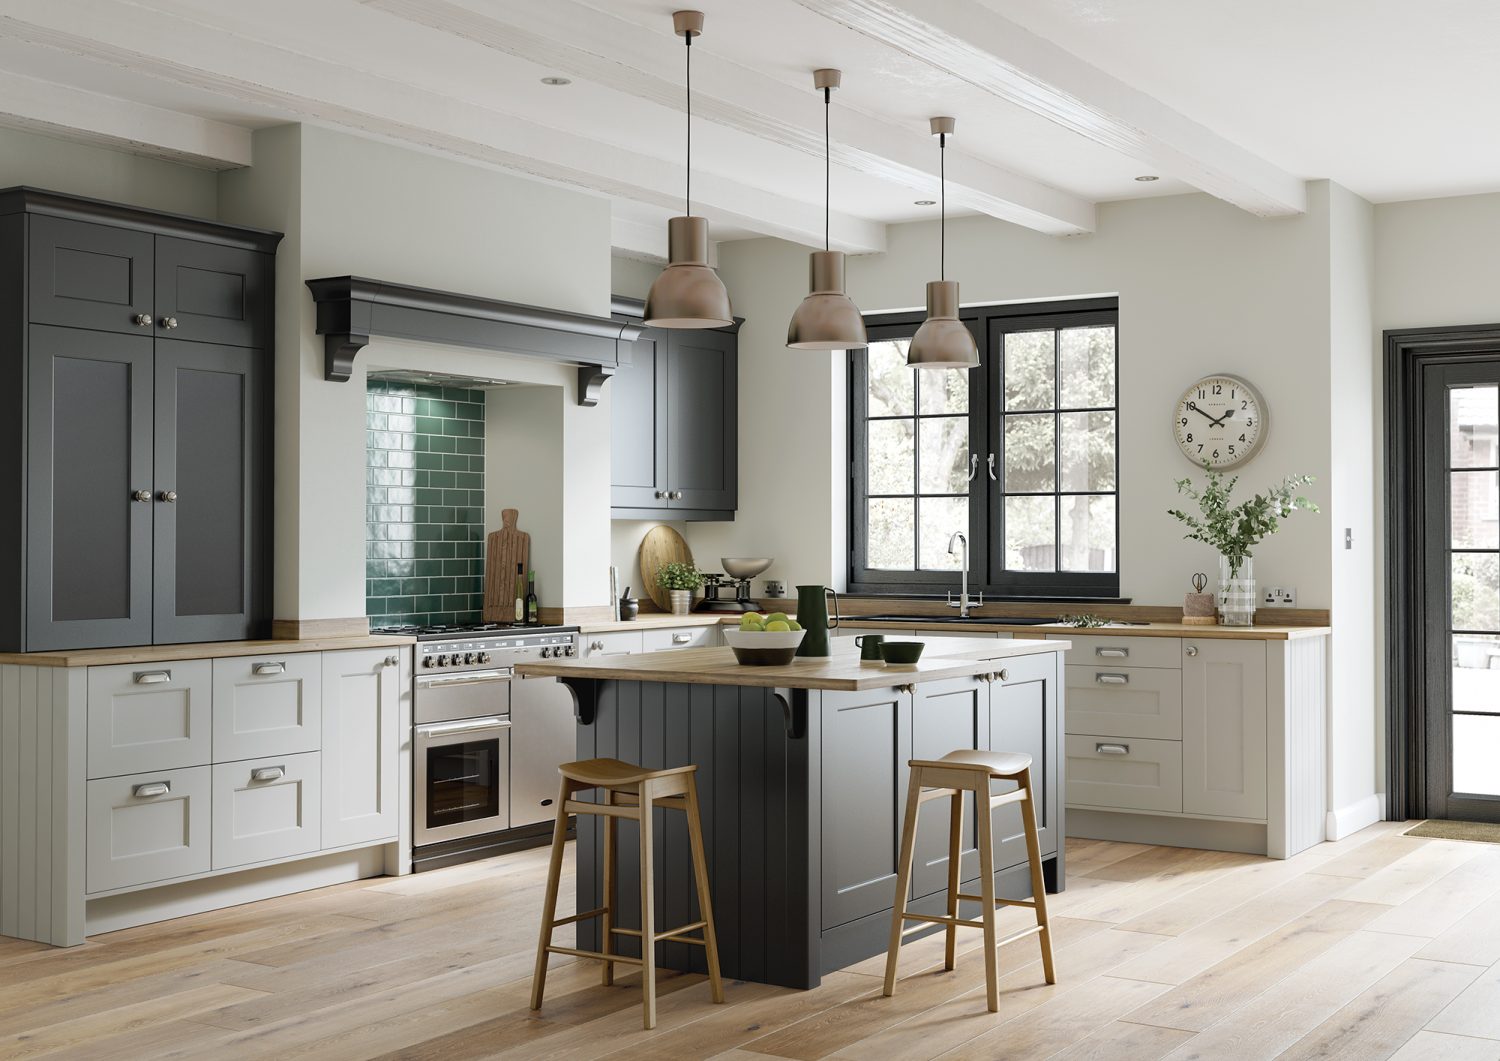 Fiorenza kitchen shaker door is showcased beautifully in wonderful Light Grey and Graphite in this kitchen design. A double oven, kitchen island and hanging lighting was used in this design by The Kitchen Depot.